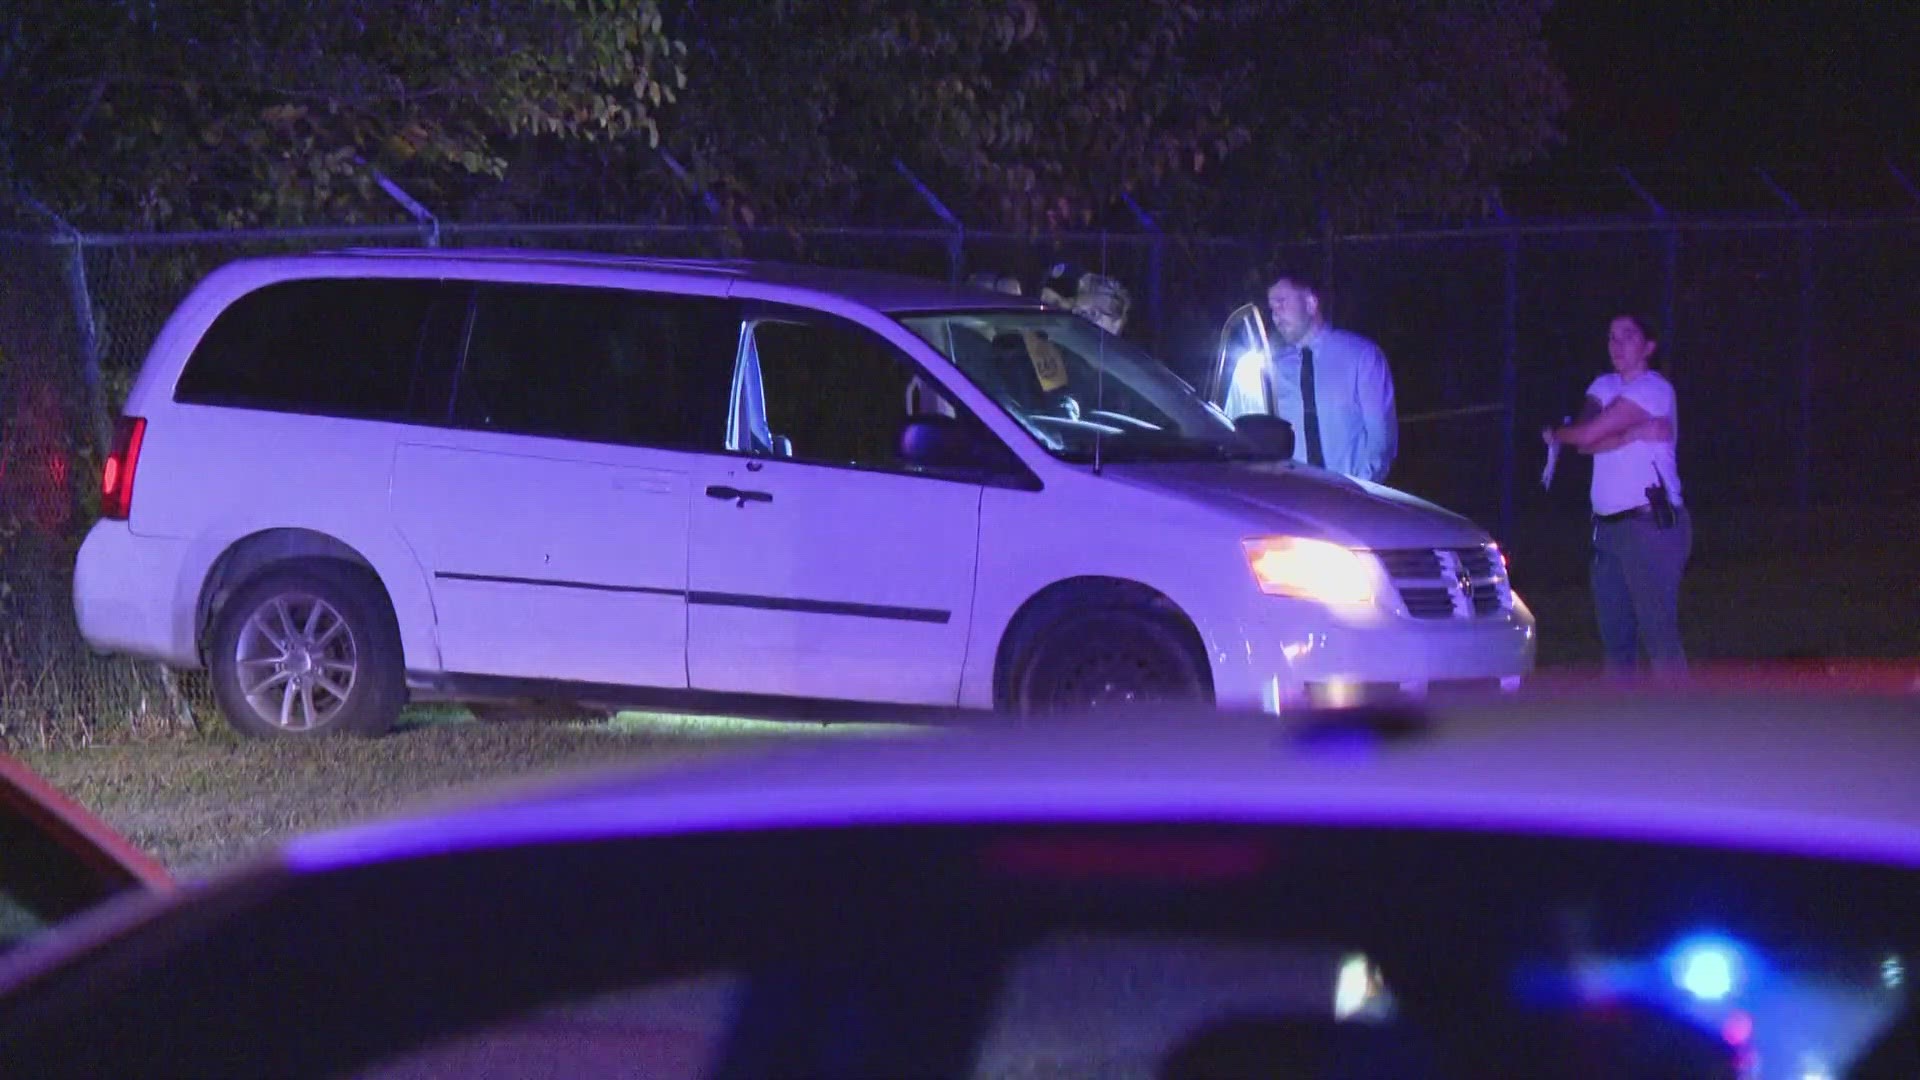 Police say a man who was shot in a van at an east Indianapolis apartment complex later died from his injuries.